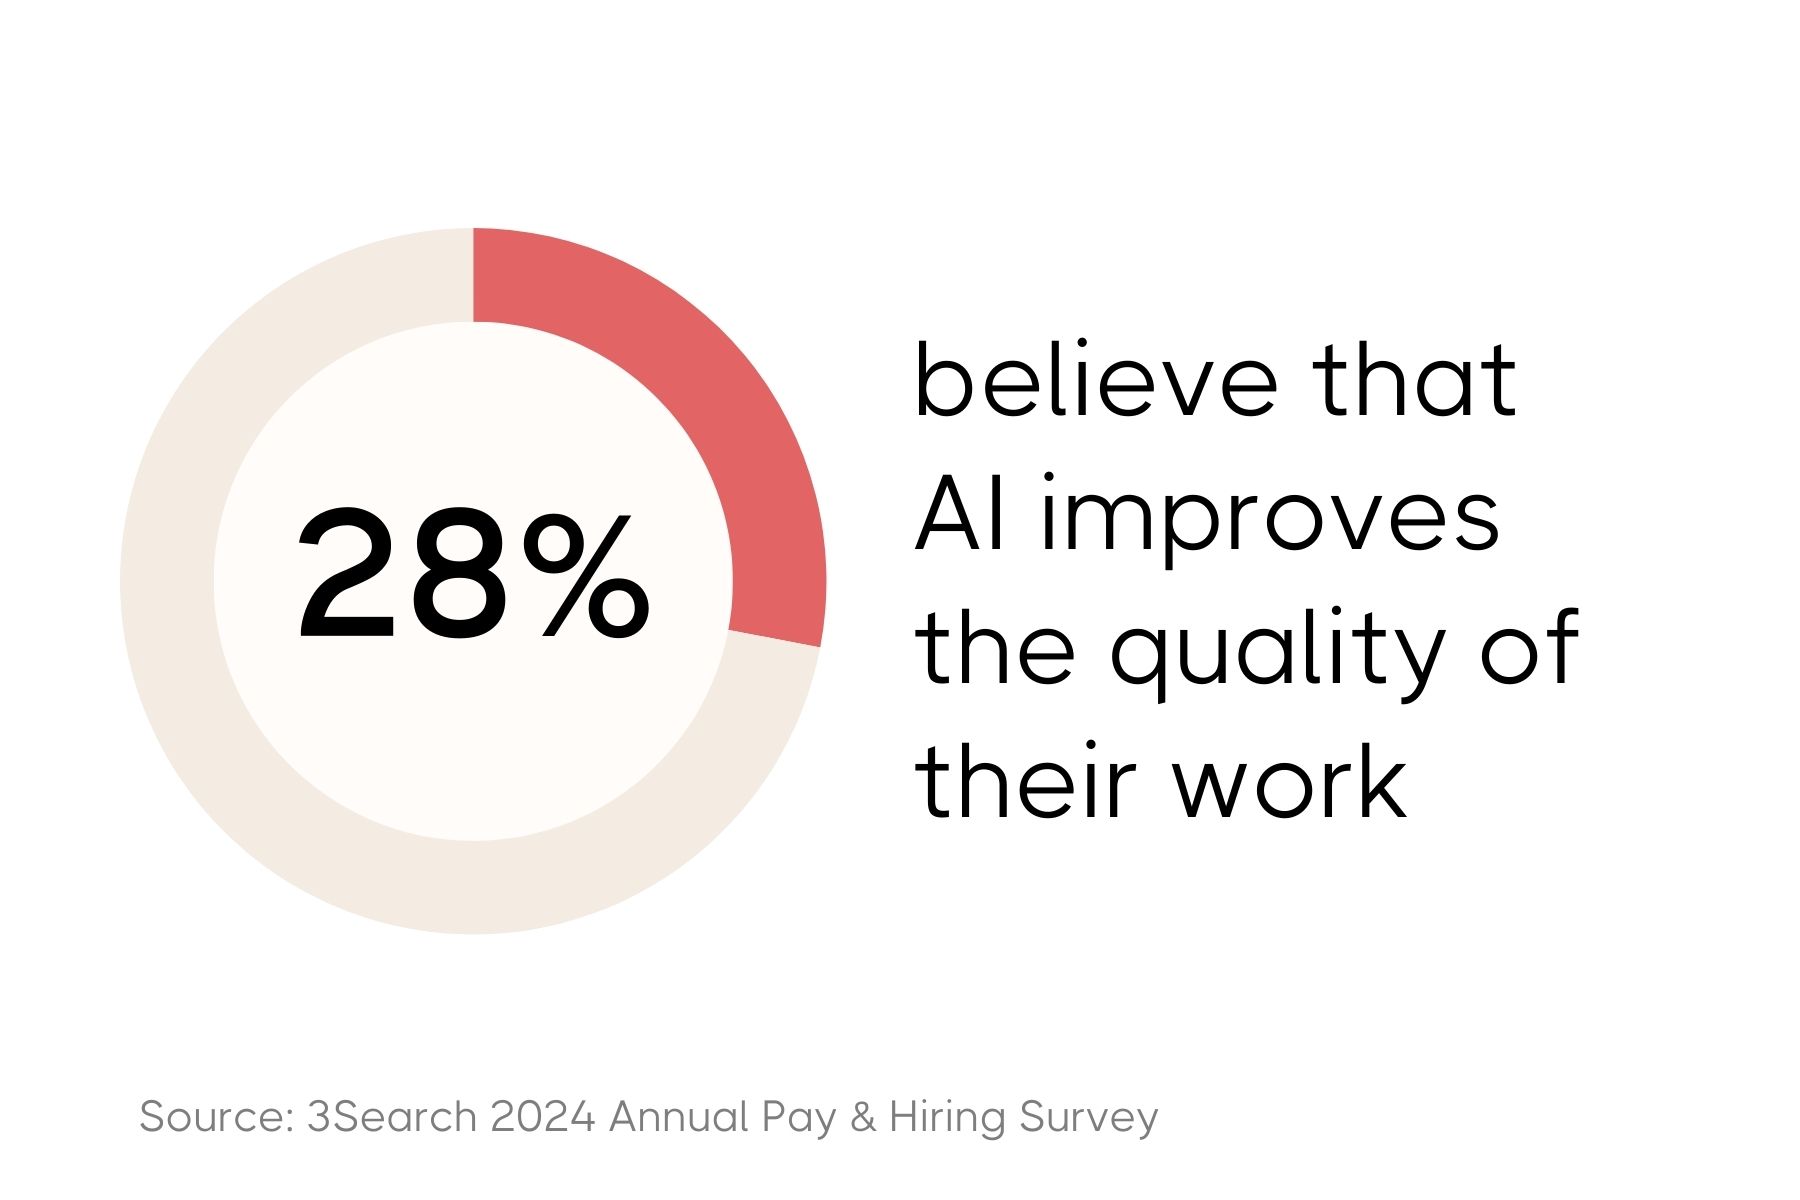 A pie chart graphic showing that 28% of respondents believe that AI improves the quality of their work, according to the '3Search 2024 Annual Pay & Hiring Survey.' The chart is mostly in shades of gray with a red segment.